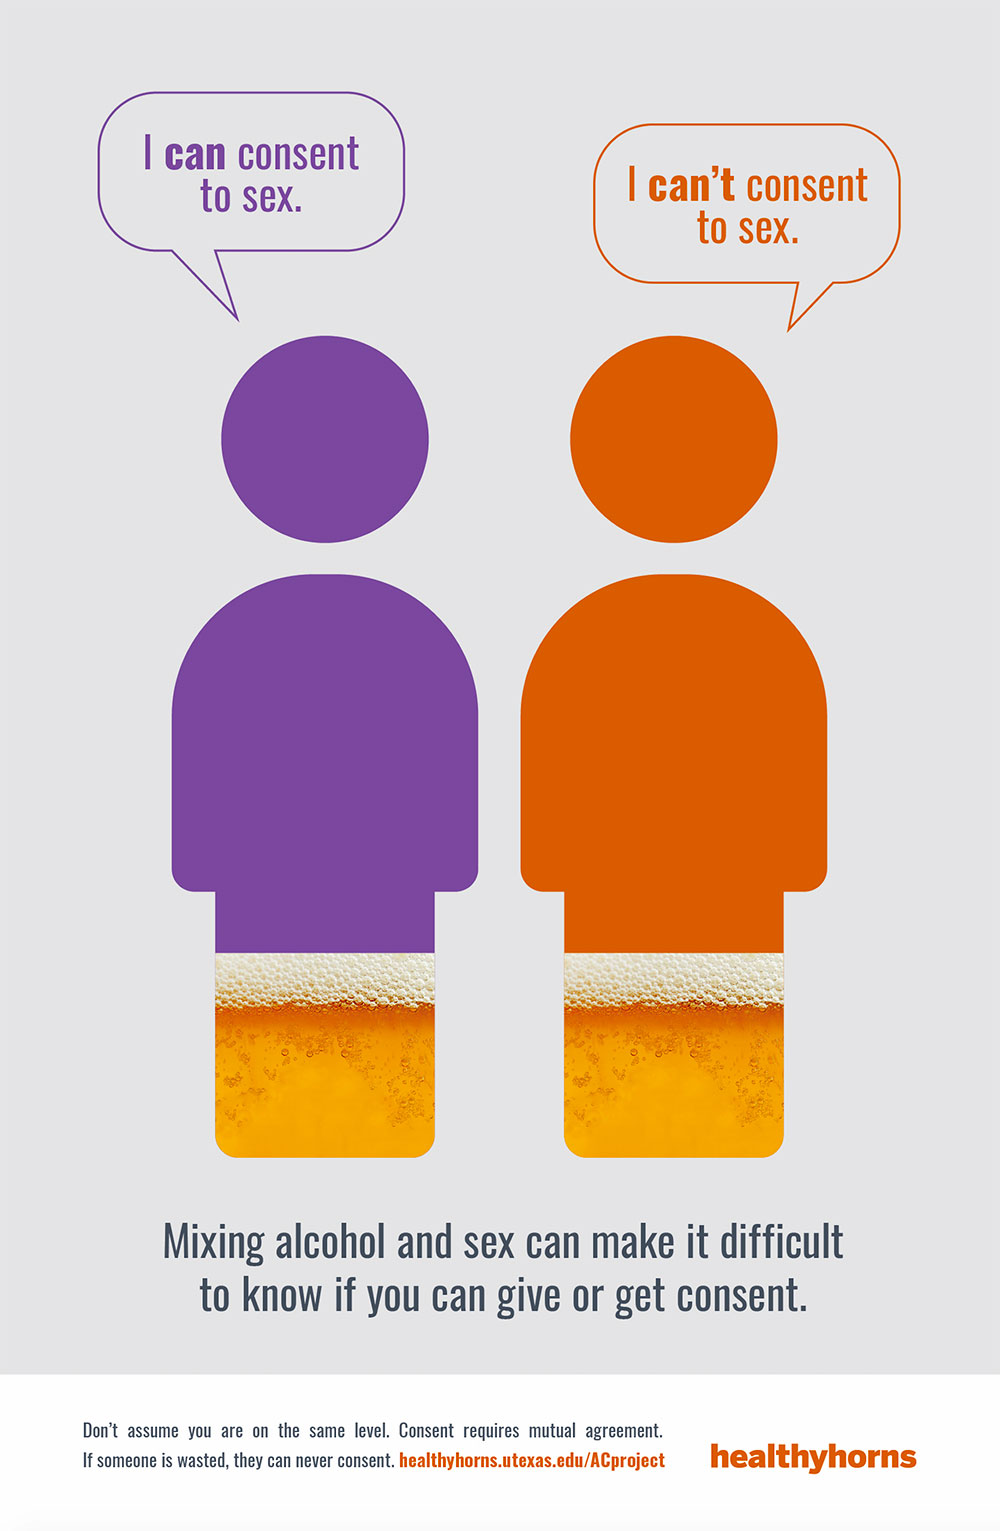 mixing alcohol and sex can make it difficult to know if you can give or get consent